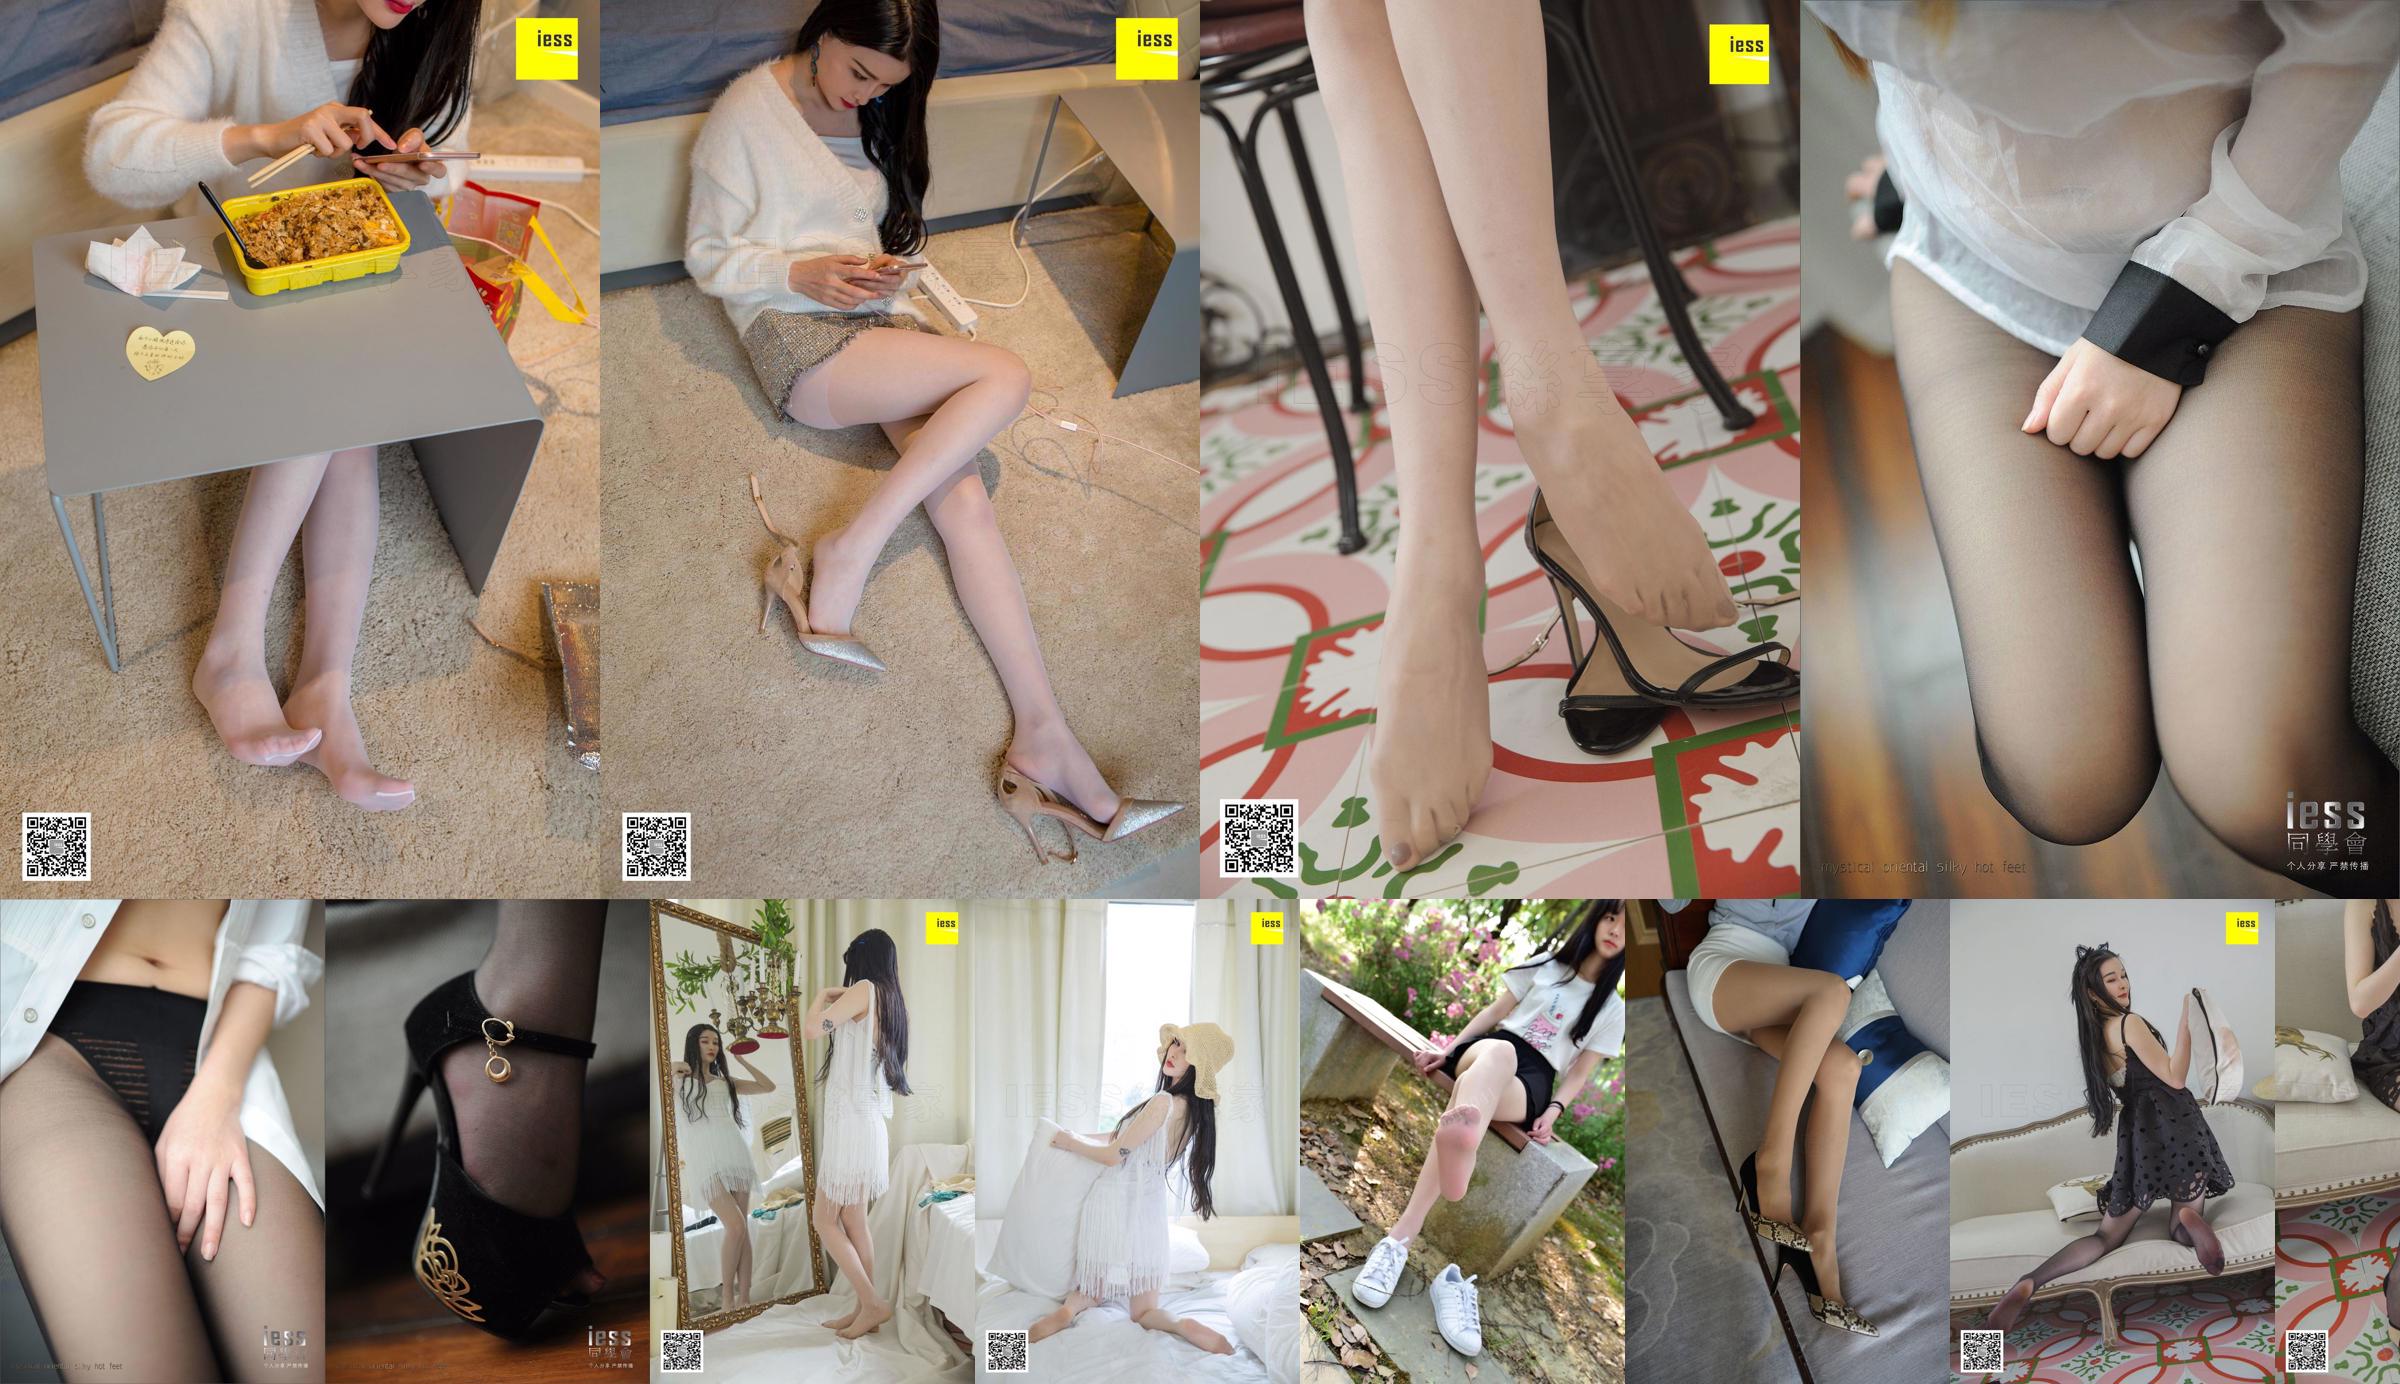 Model Mengmeng "Mengmeng Eating Takeaway" Silky Feet and Beautiful Legs [Iss] No.4022e6 Page 1